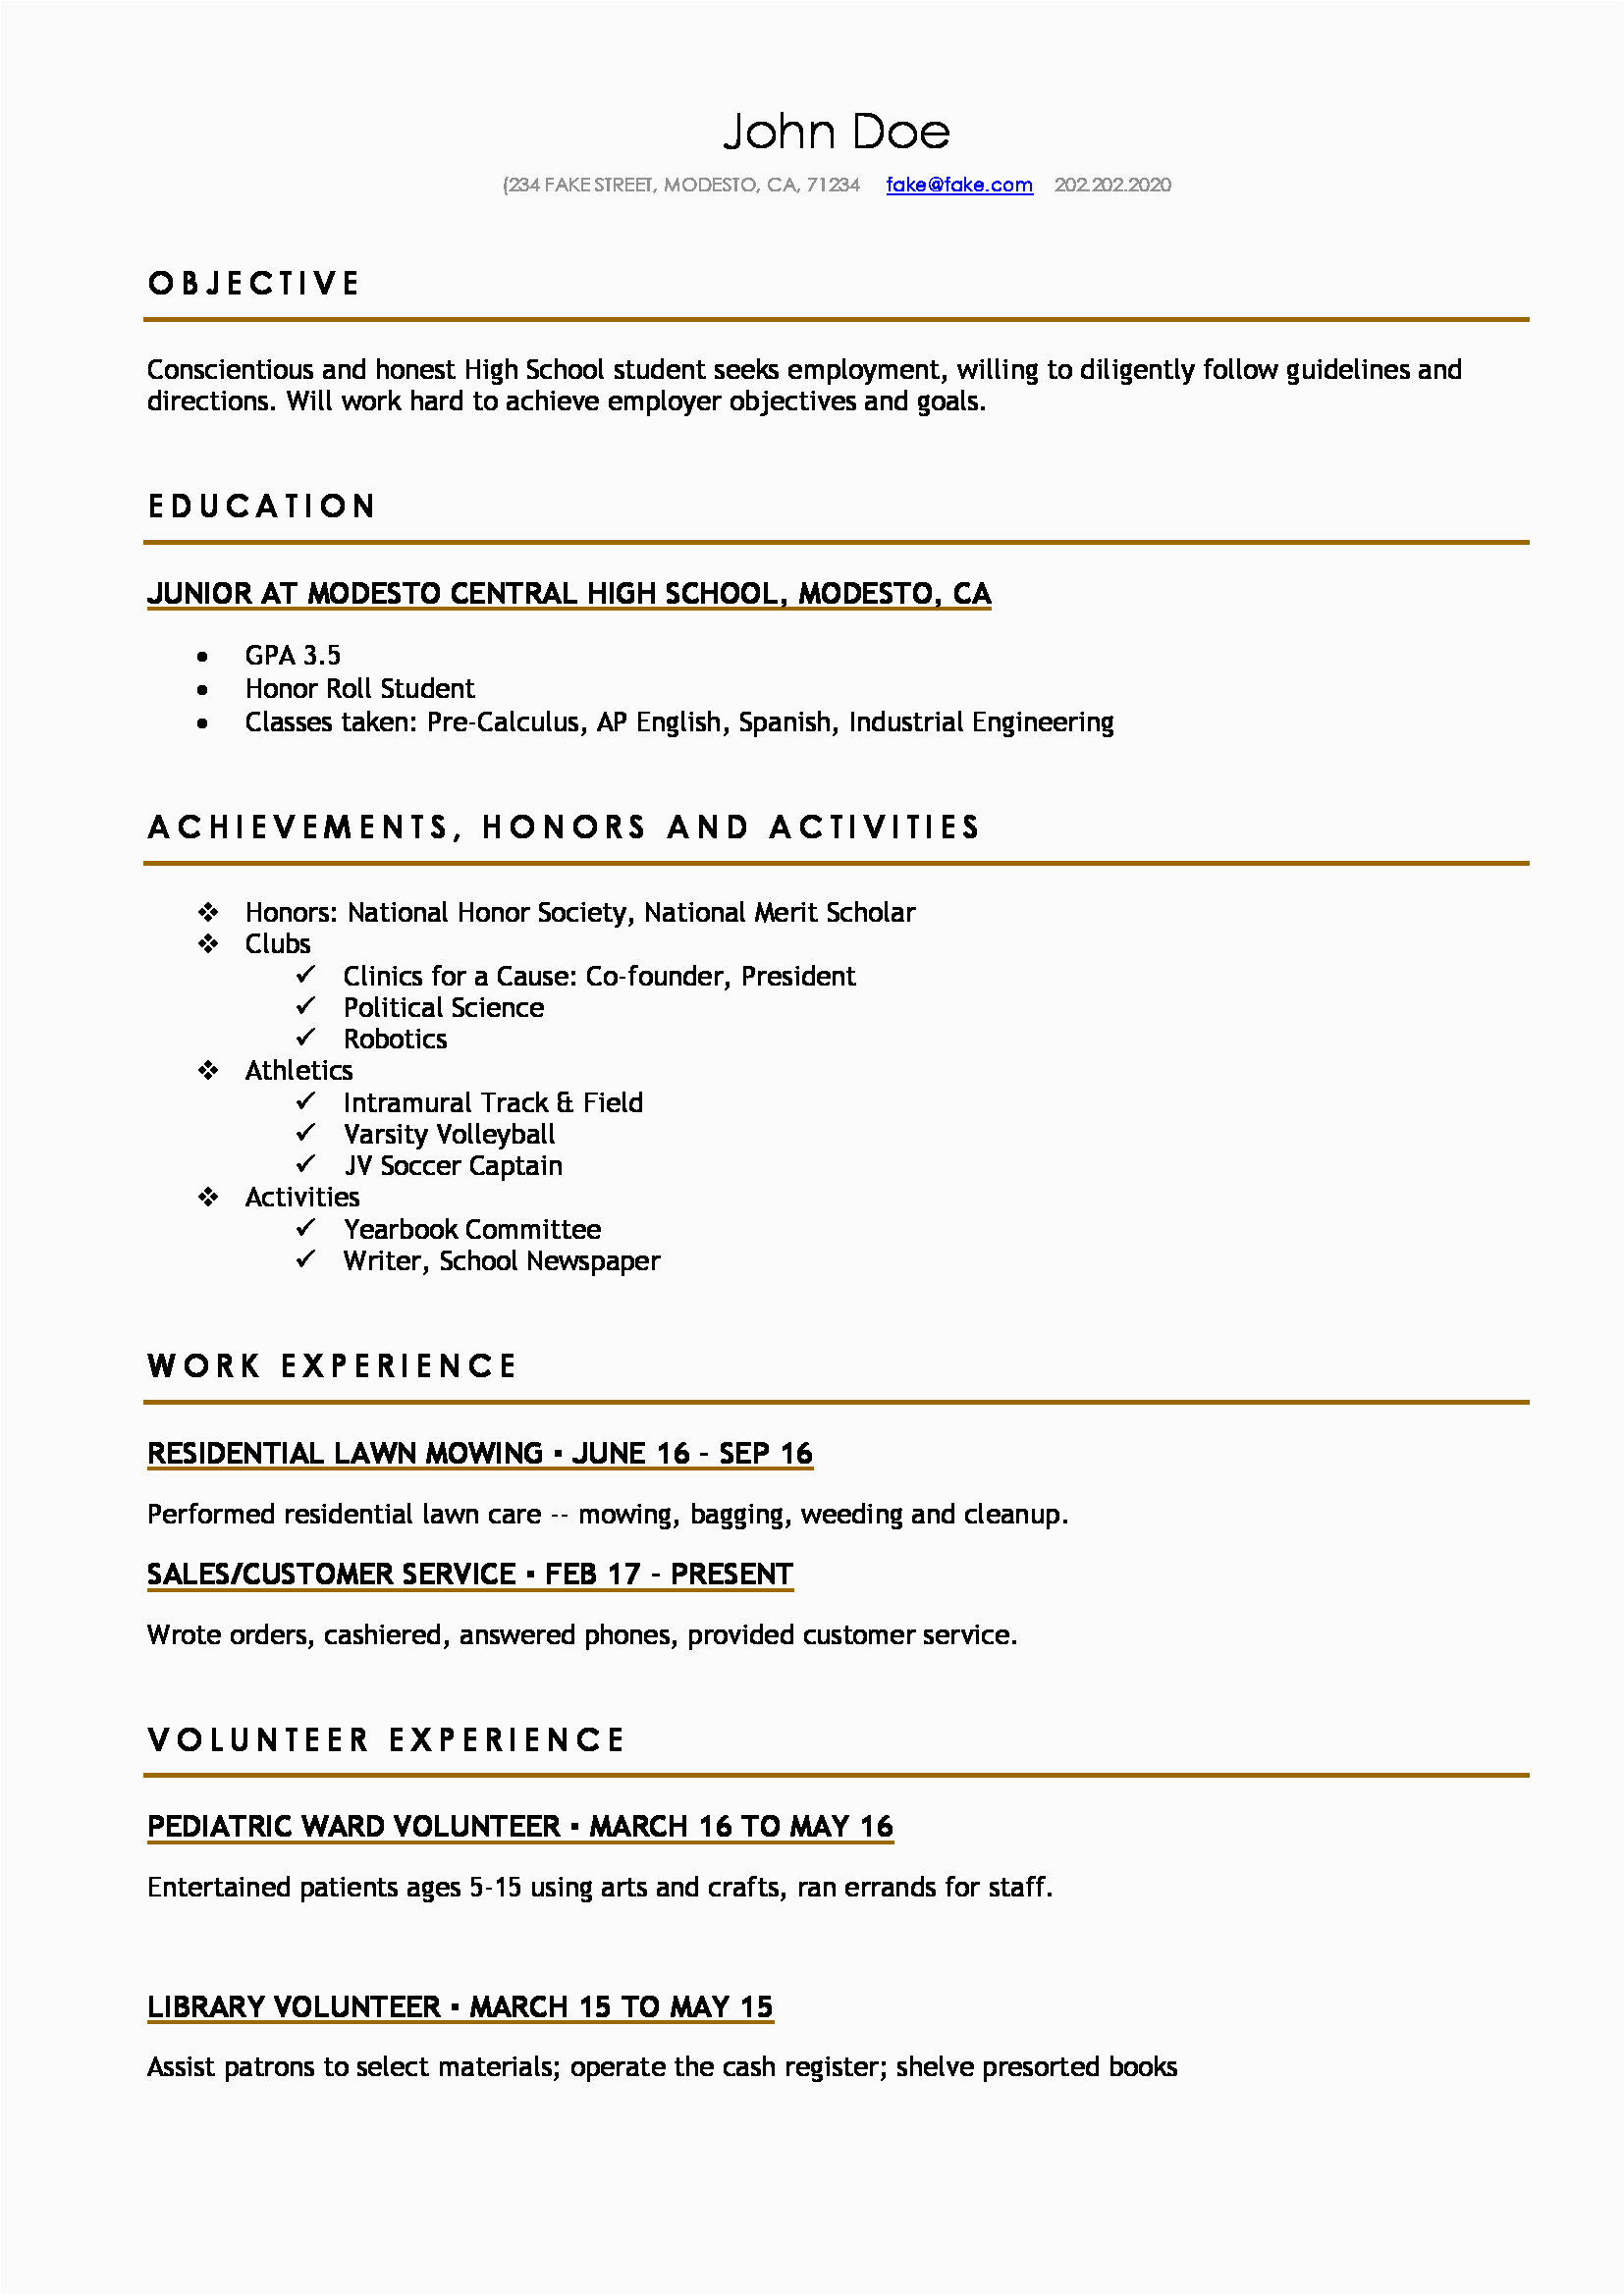 Sample Resume for A Student In High School High School Resume Resume Templates for High School